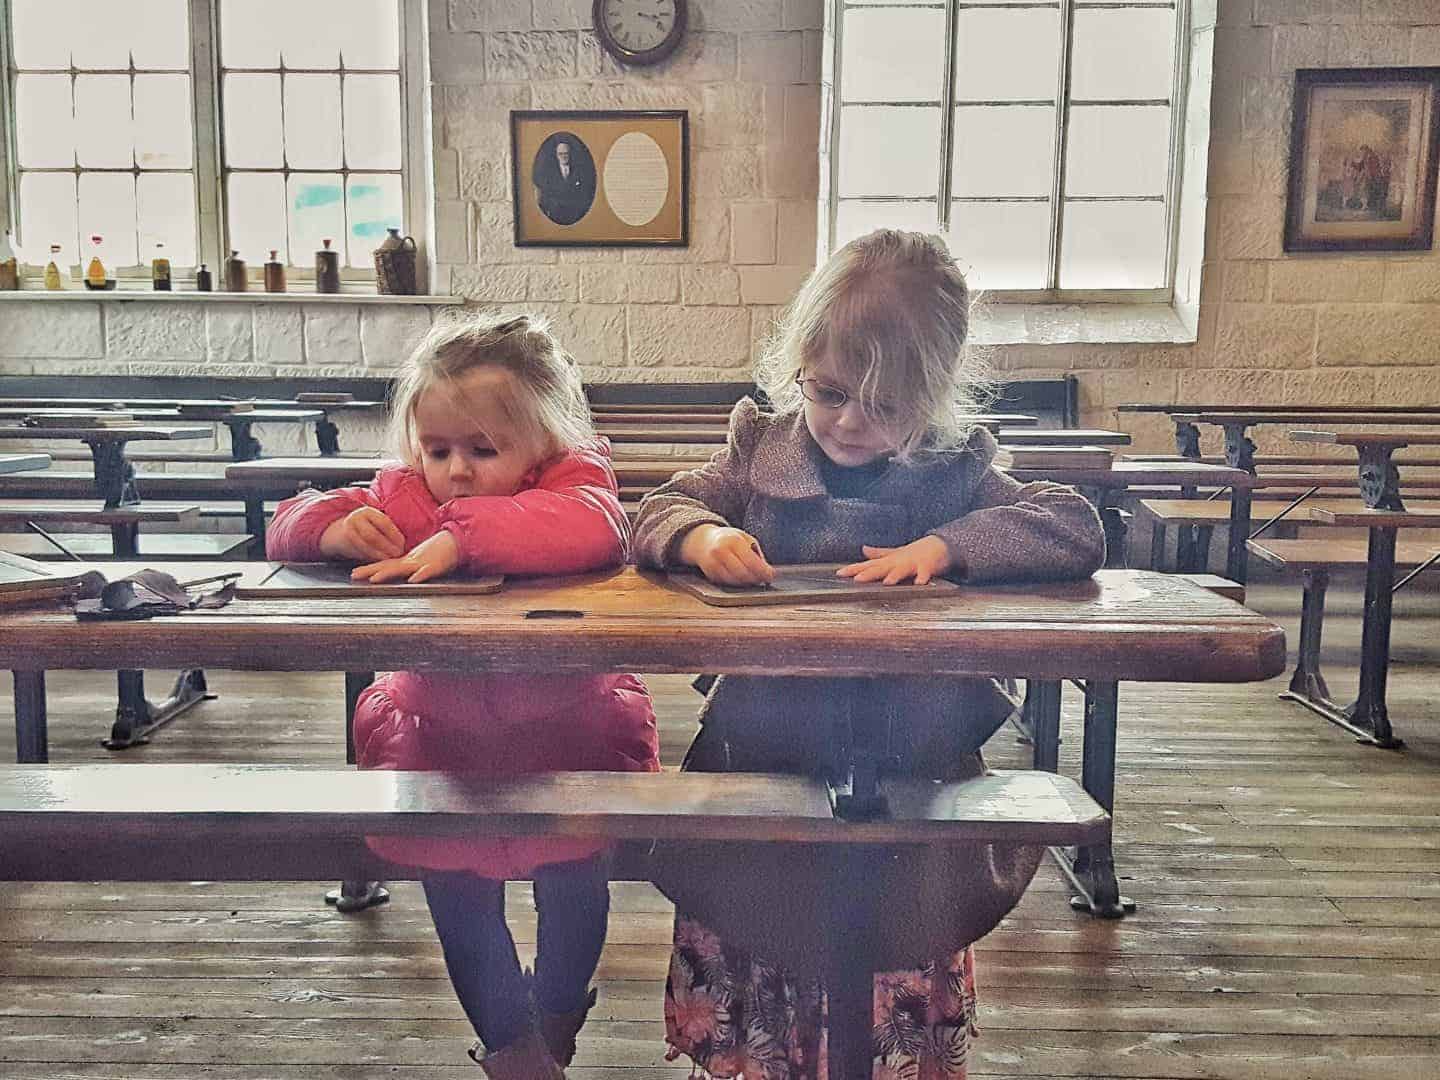 12 tips for a brilliant day out at the Black Country Living Museum near Dudley in the West Midlands. This is a living history museum that is perfect for visitors of all ages from small children to adults. It is an excellent, full day out with both food outlets and picnic areas available. Includes the Dudley Canal and Tunnel Trust.